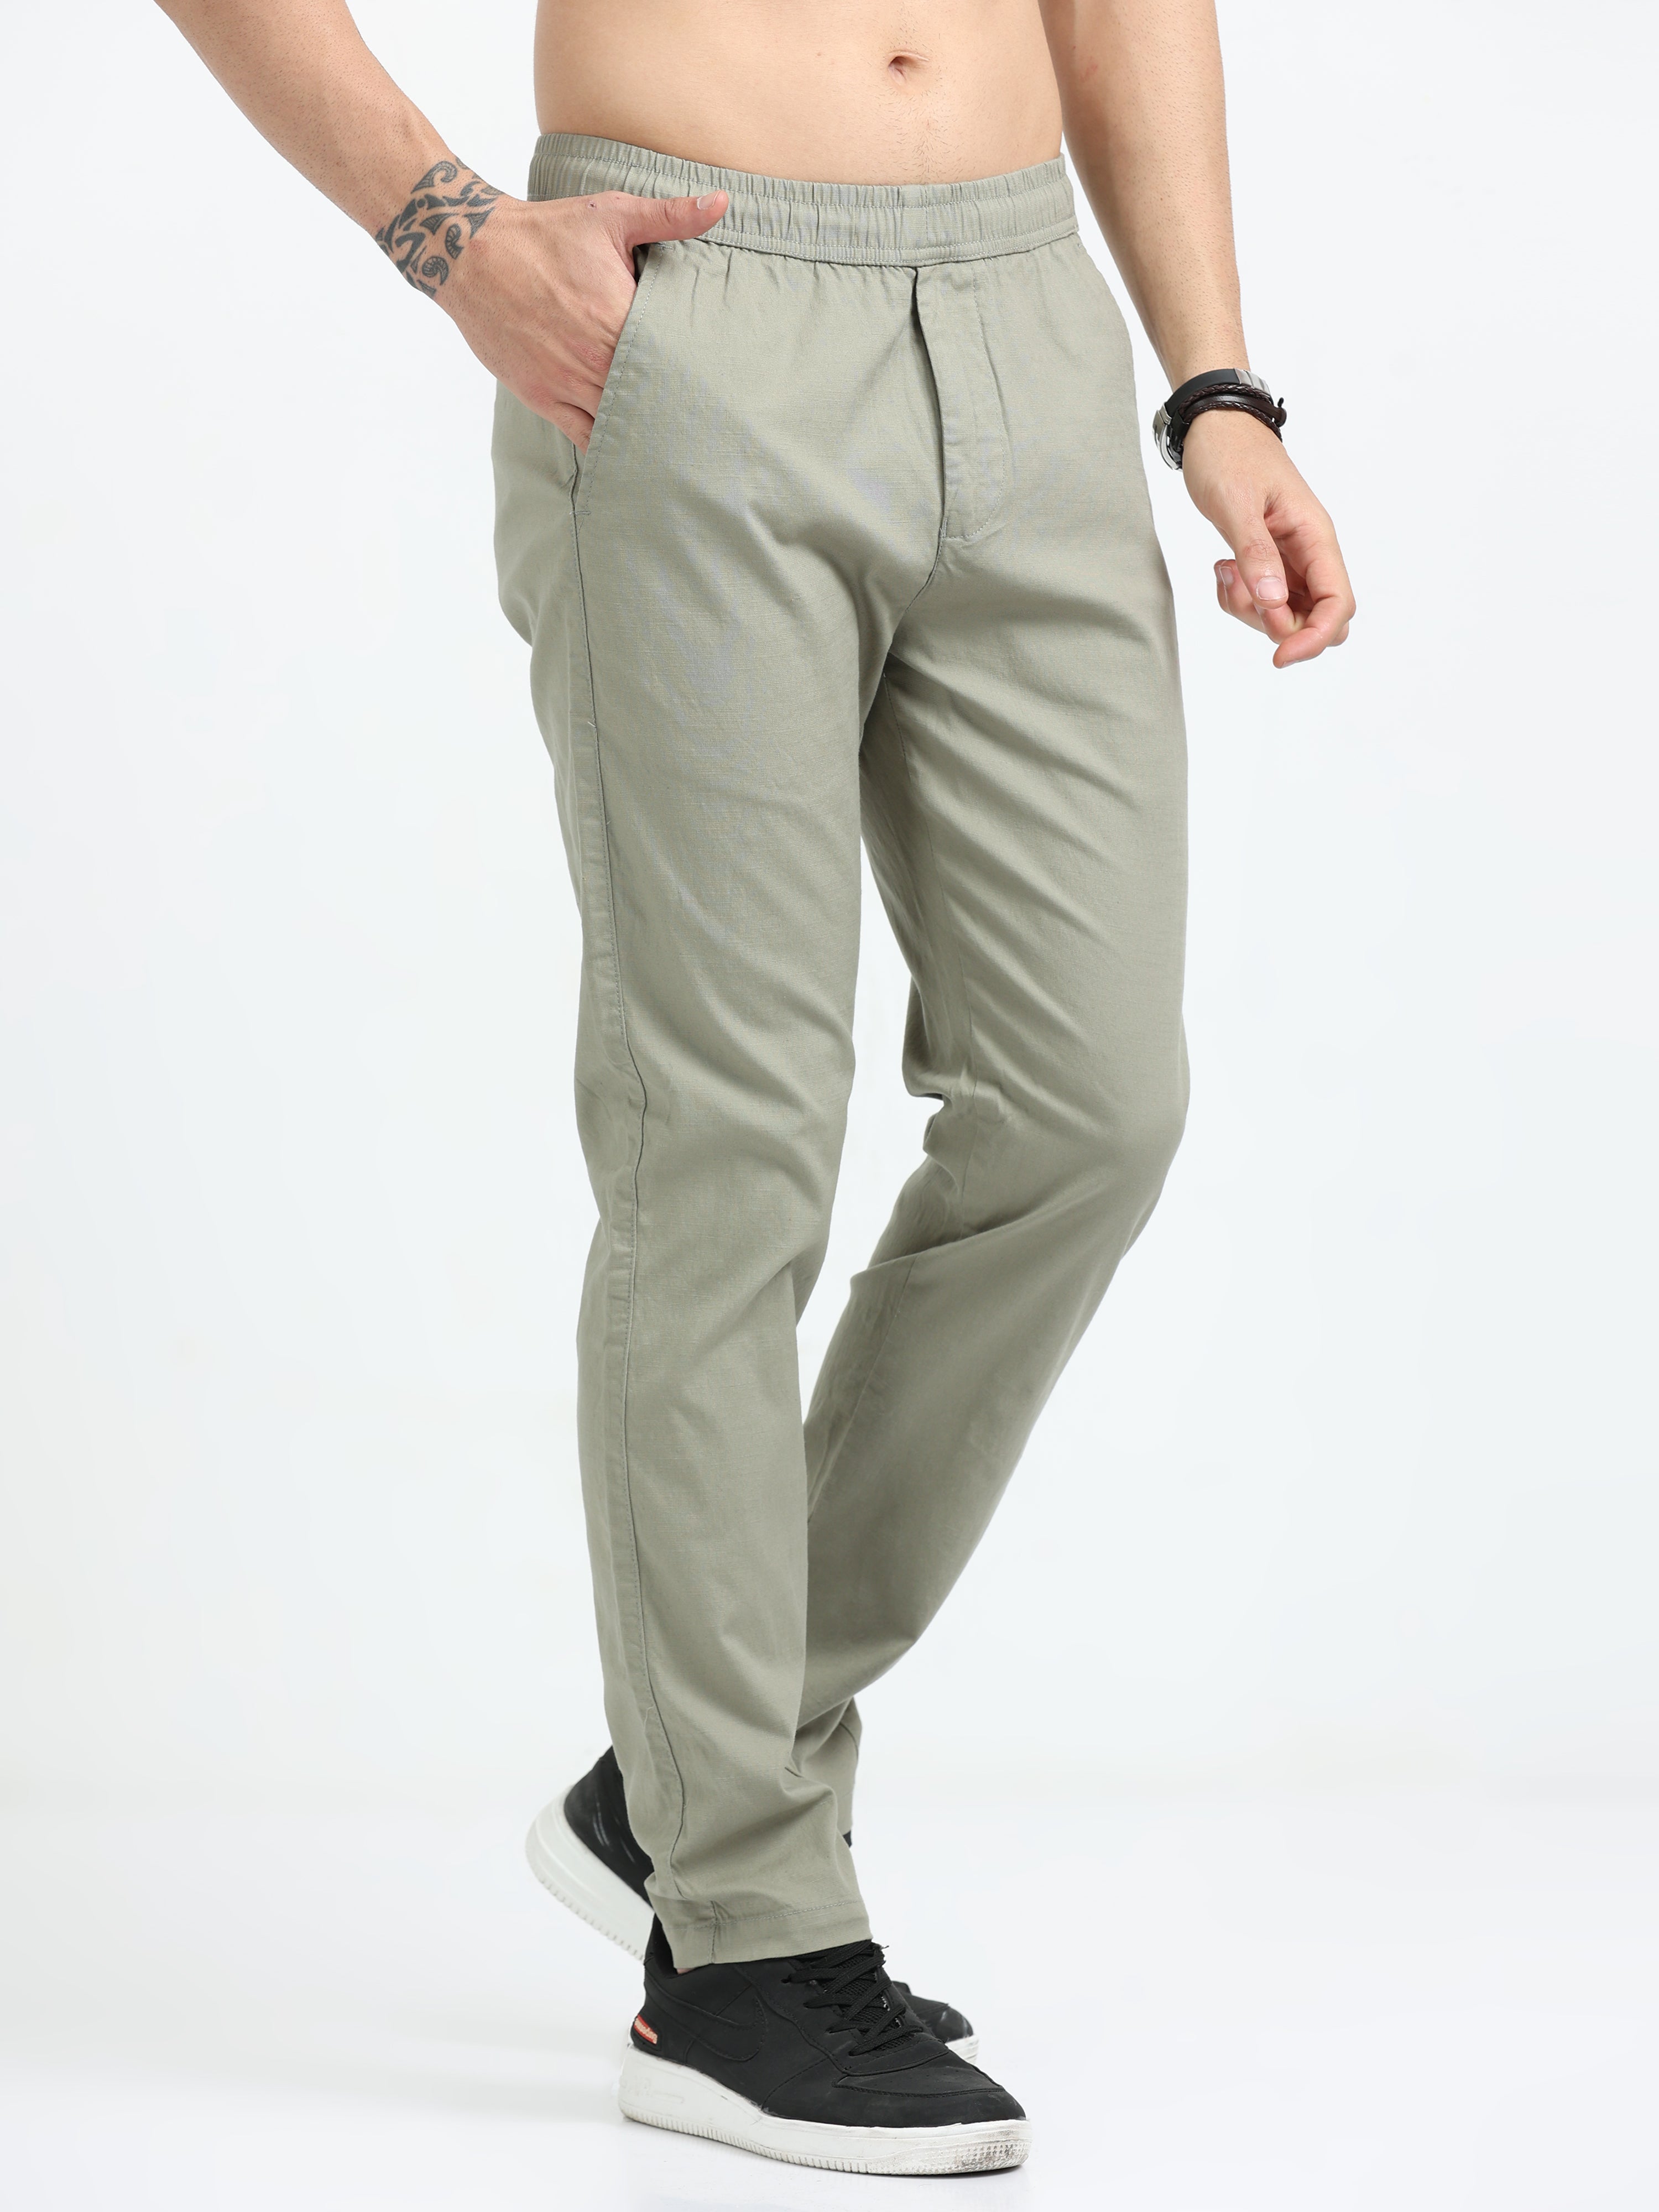 Mens Comfy Cargo Jeans With Multi Pockets And Stretchy Design Solid Color  Mens Skinny Cargo Trousers H1116291U From Ai790, $33.76 | DHgate.Com